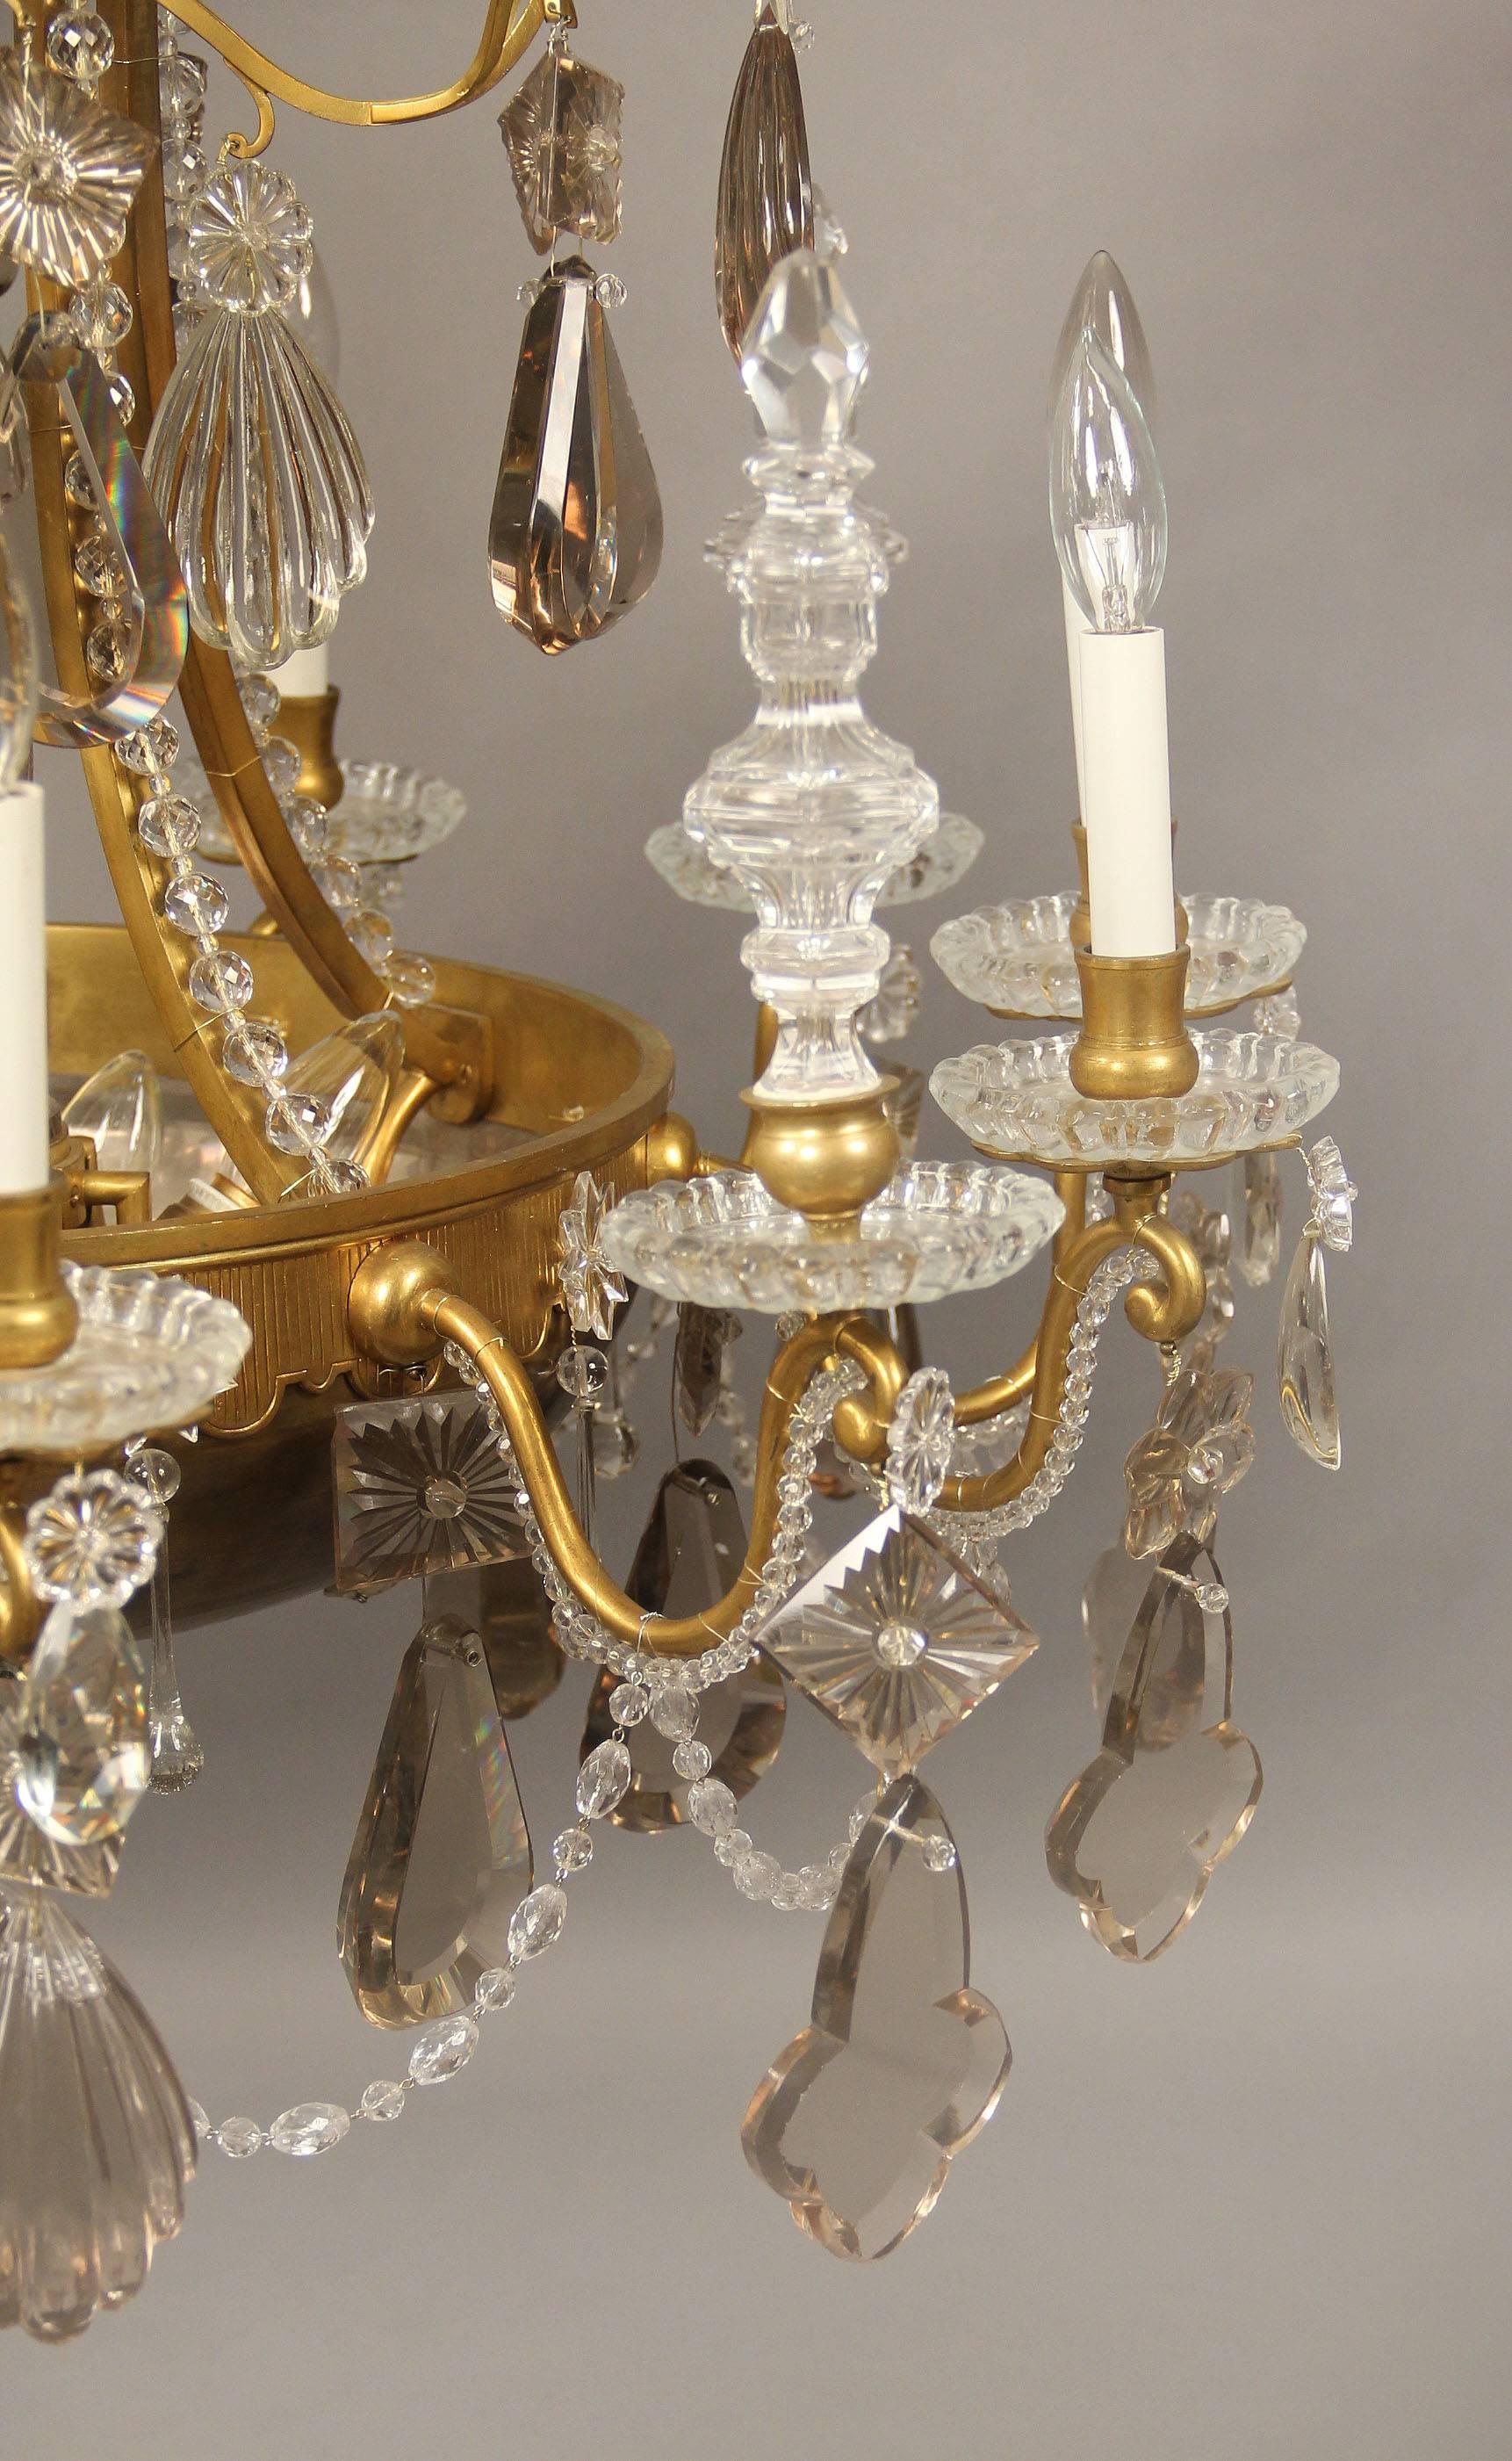 Late 19th-Early 20th Century Gilt Bronze and Baccarat Crystal Chandelier For Sale 1